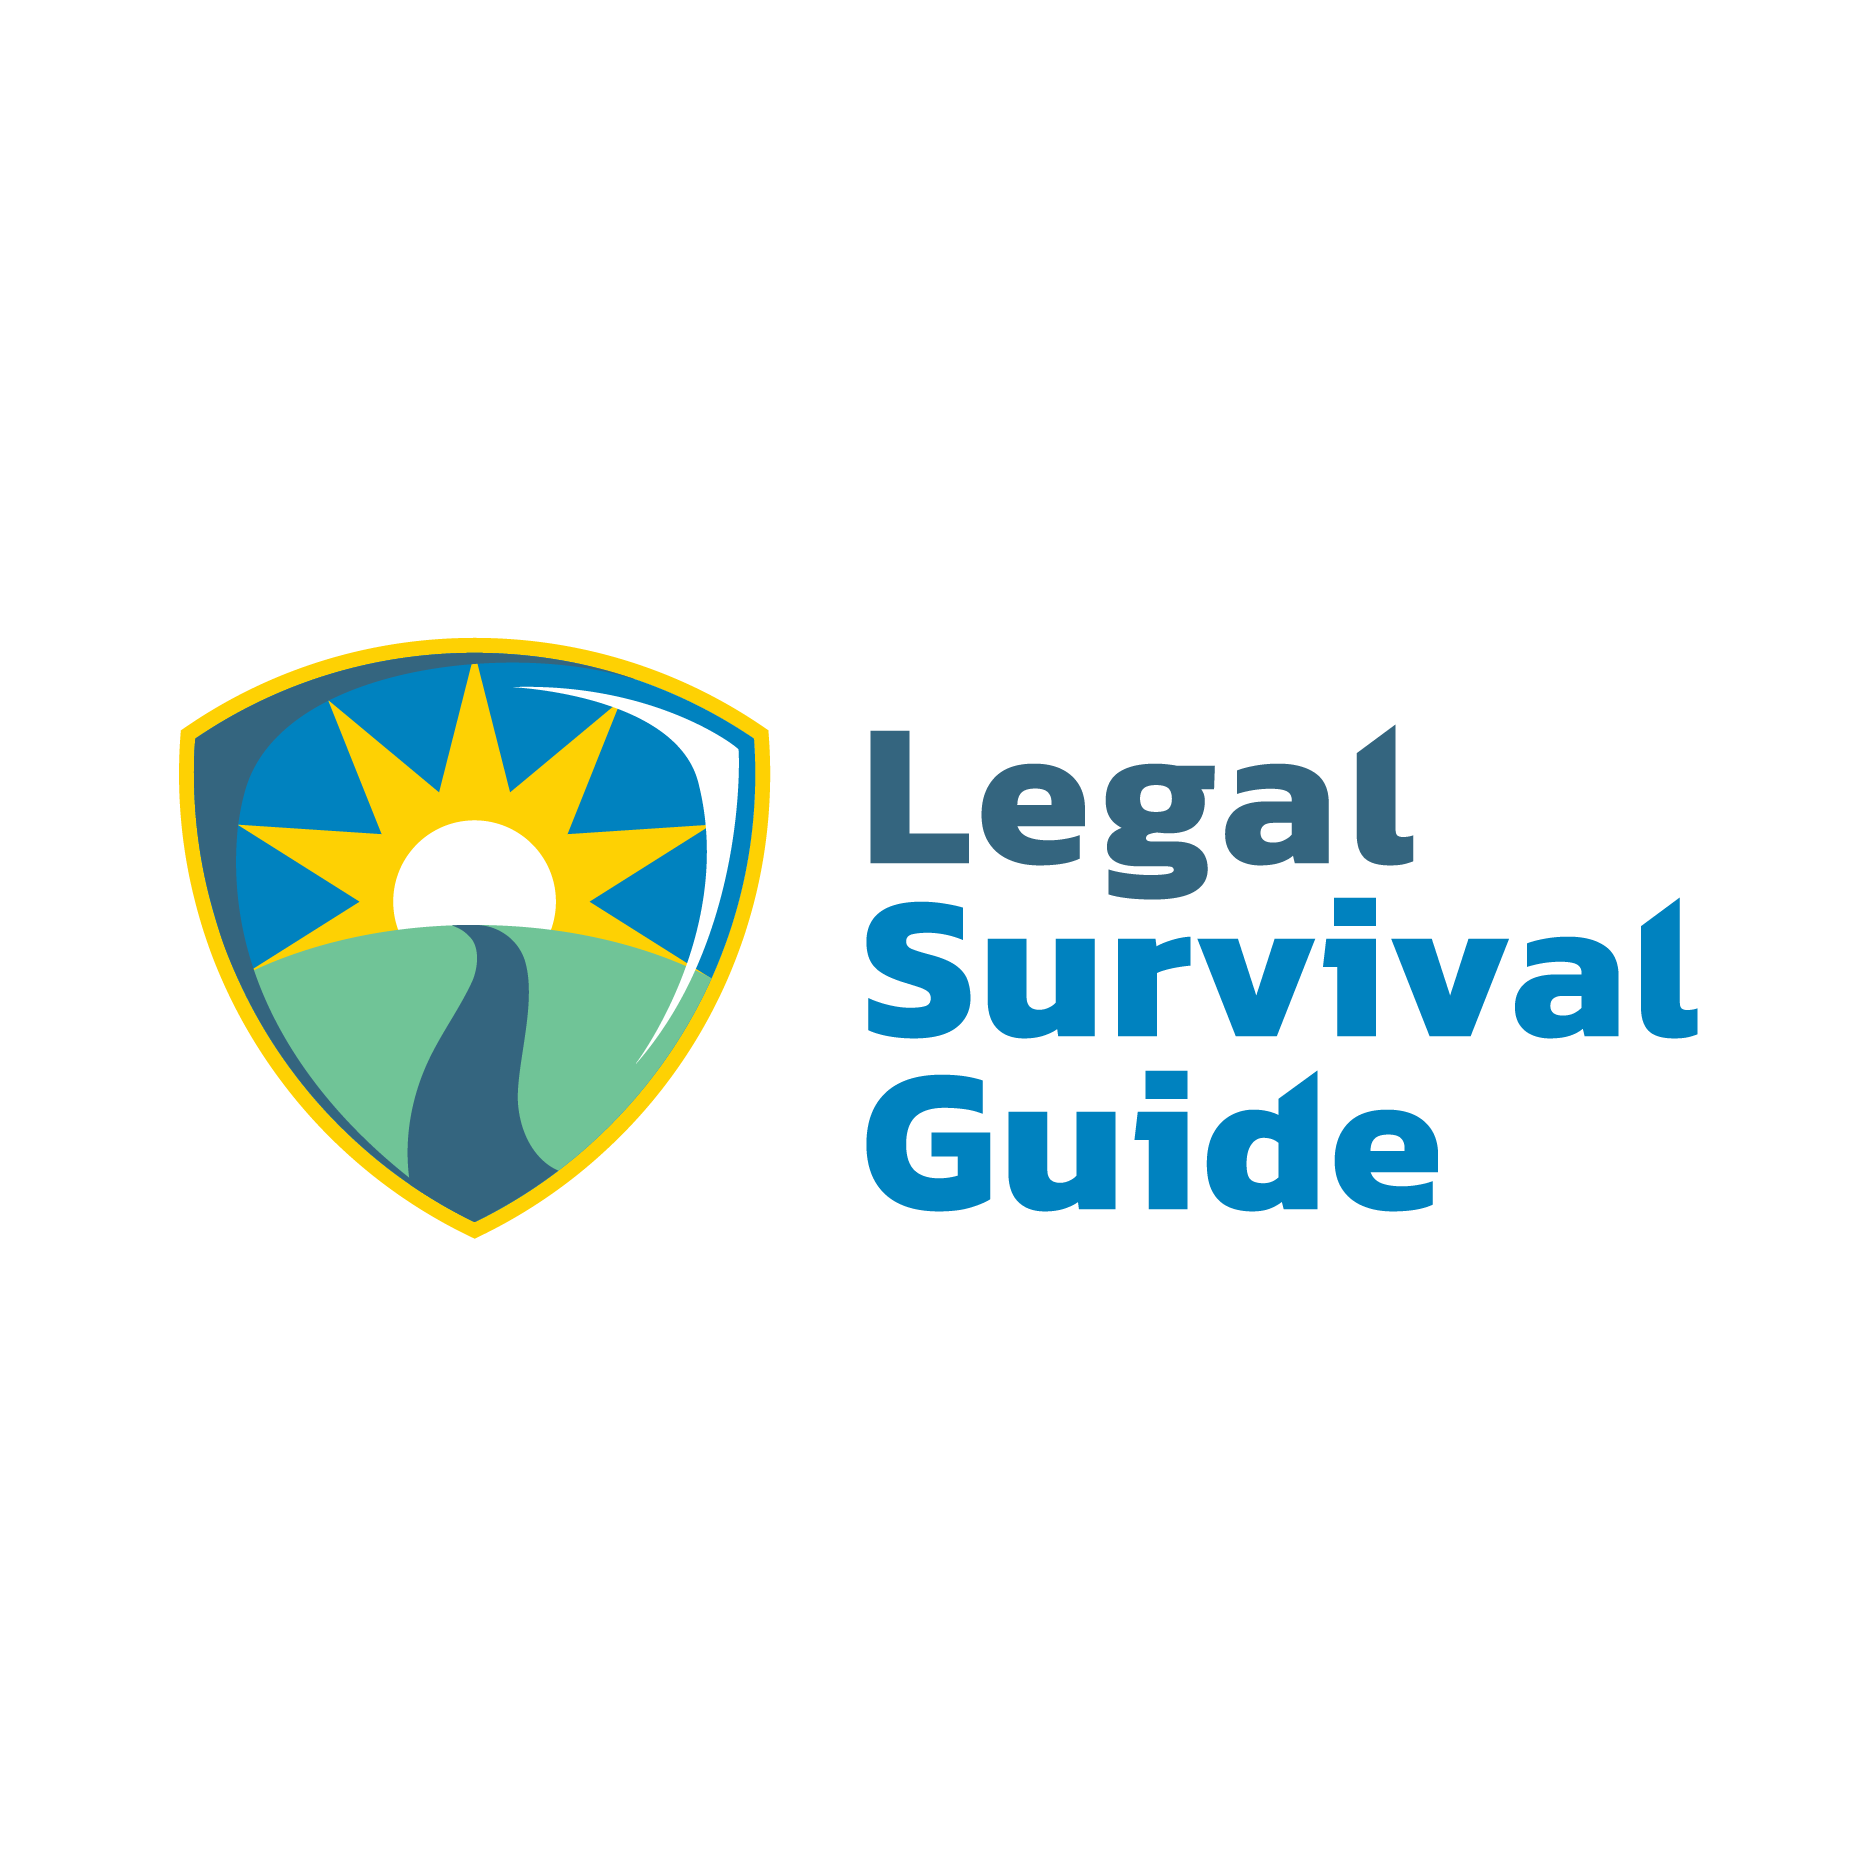 Legal Survival Guide  logo design by logo designer Shapeshifter Creative Co. for your inspiration and for the worlds largest logo competition